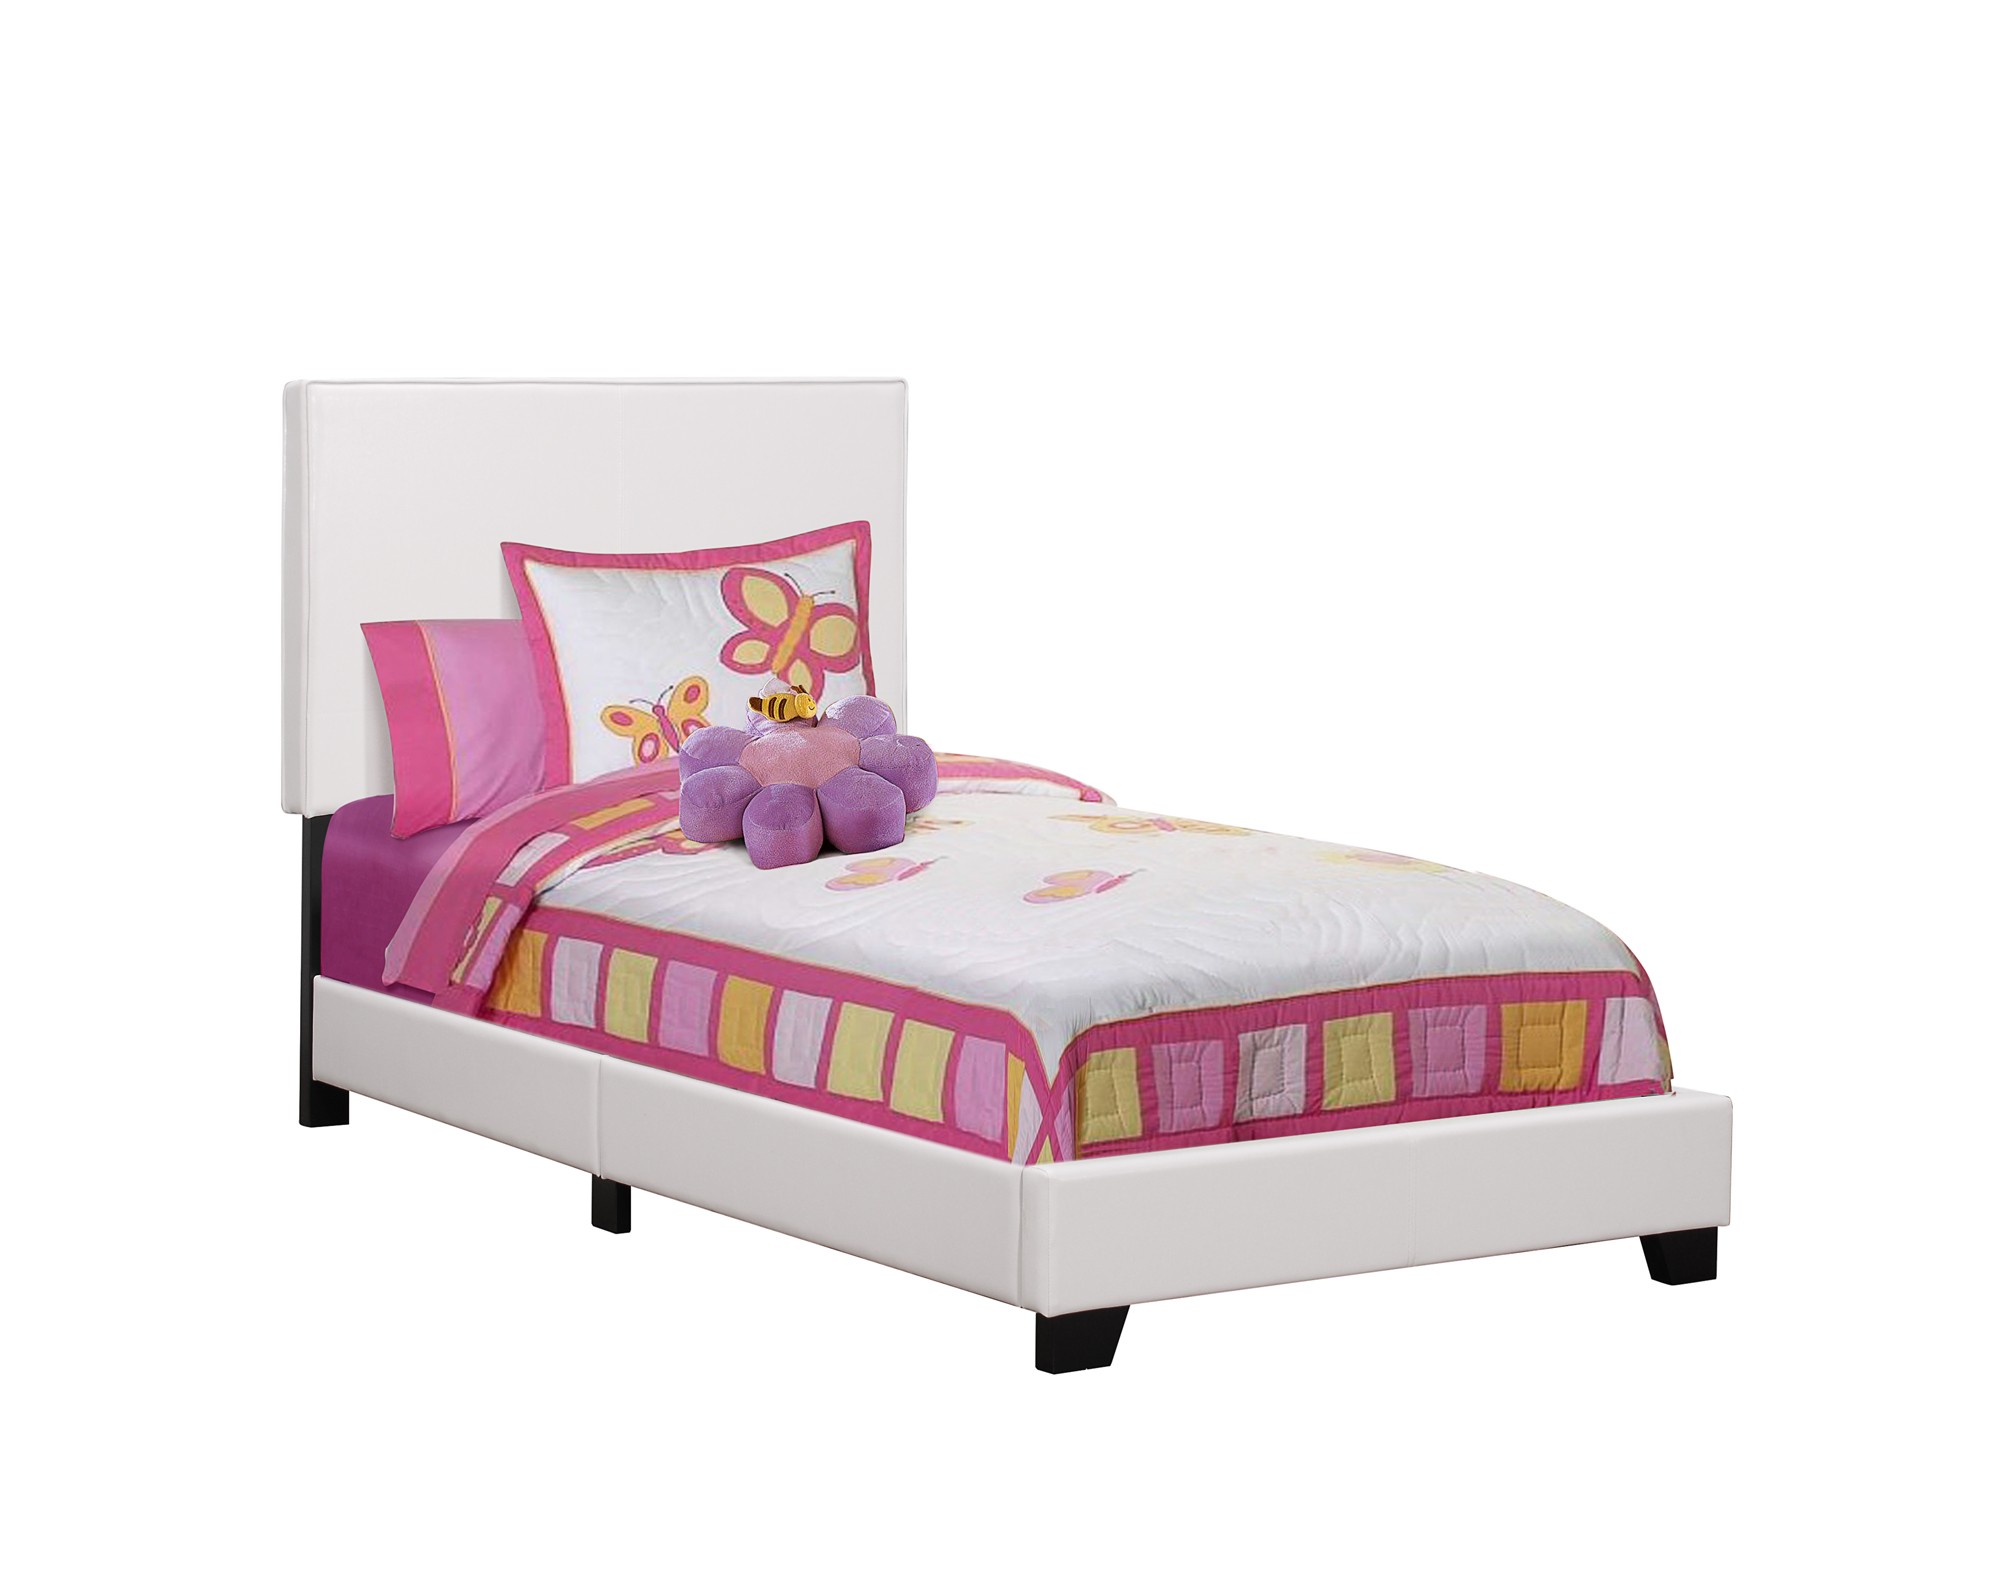 BED - TWIN SIZE / WHITE LEATHER-LOOK